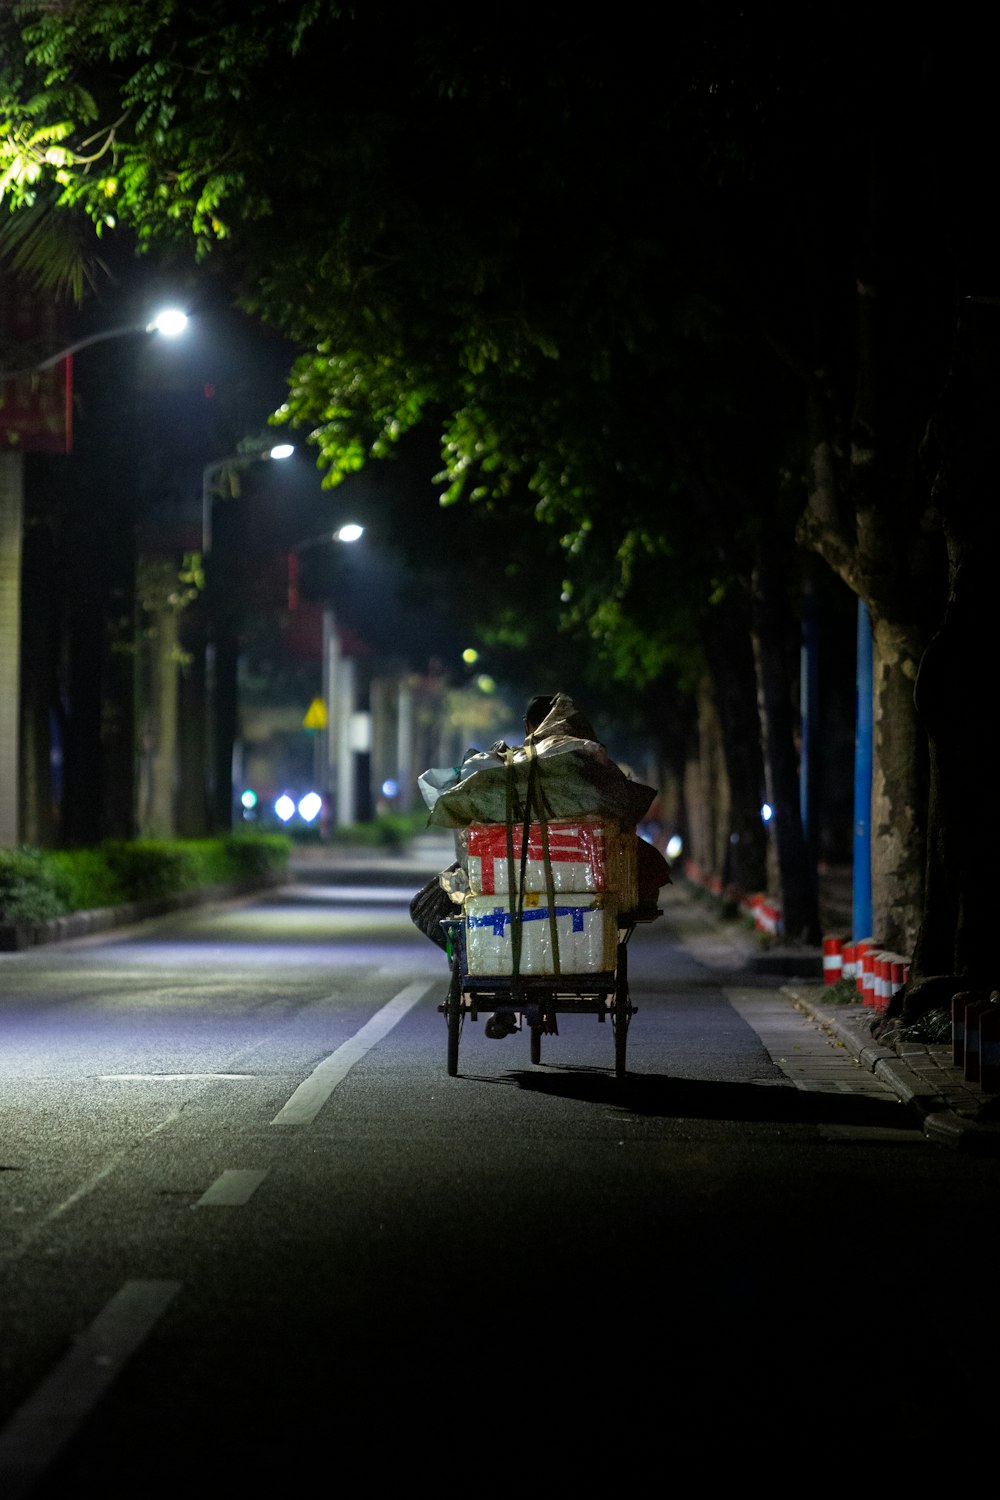 a person riding a cart down a street at night